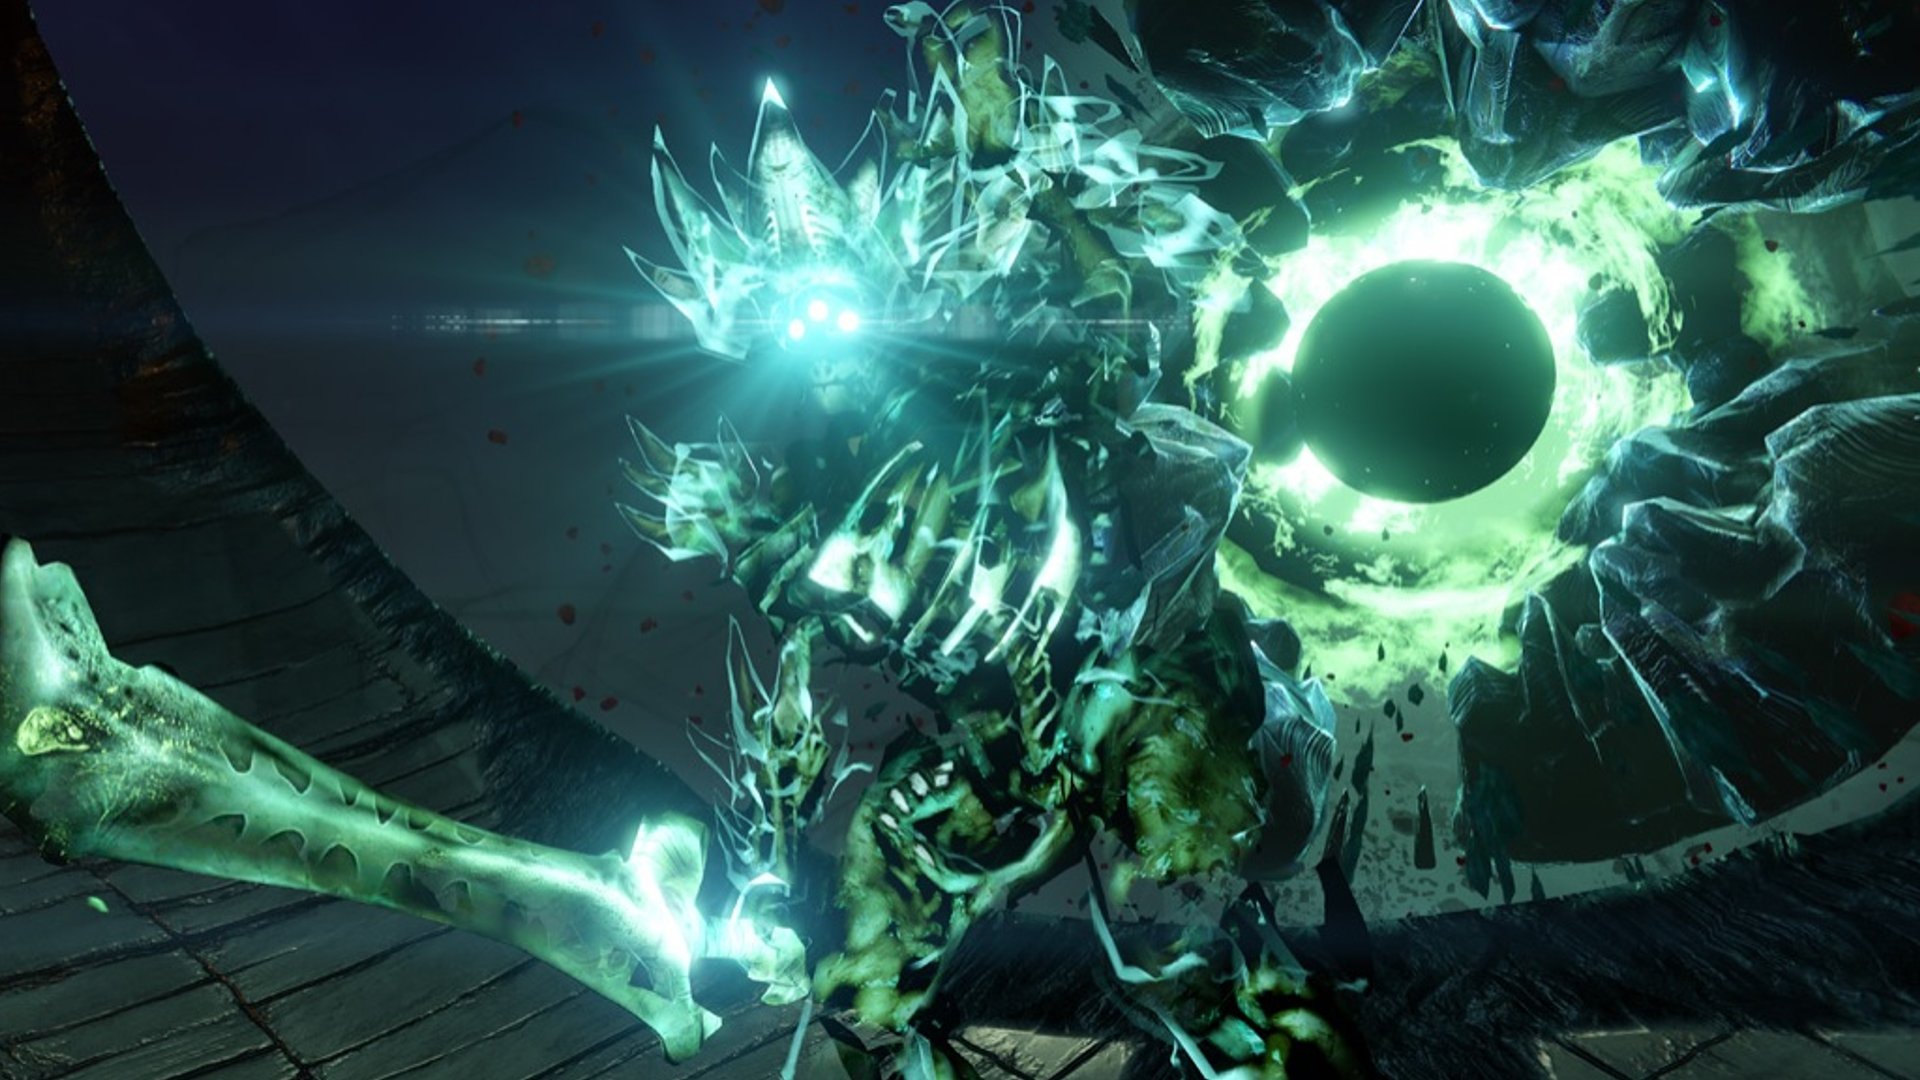 Crota in his chamber can be seen